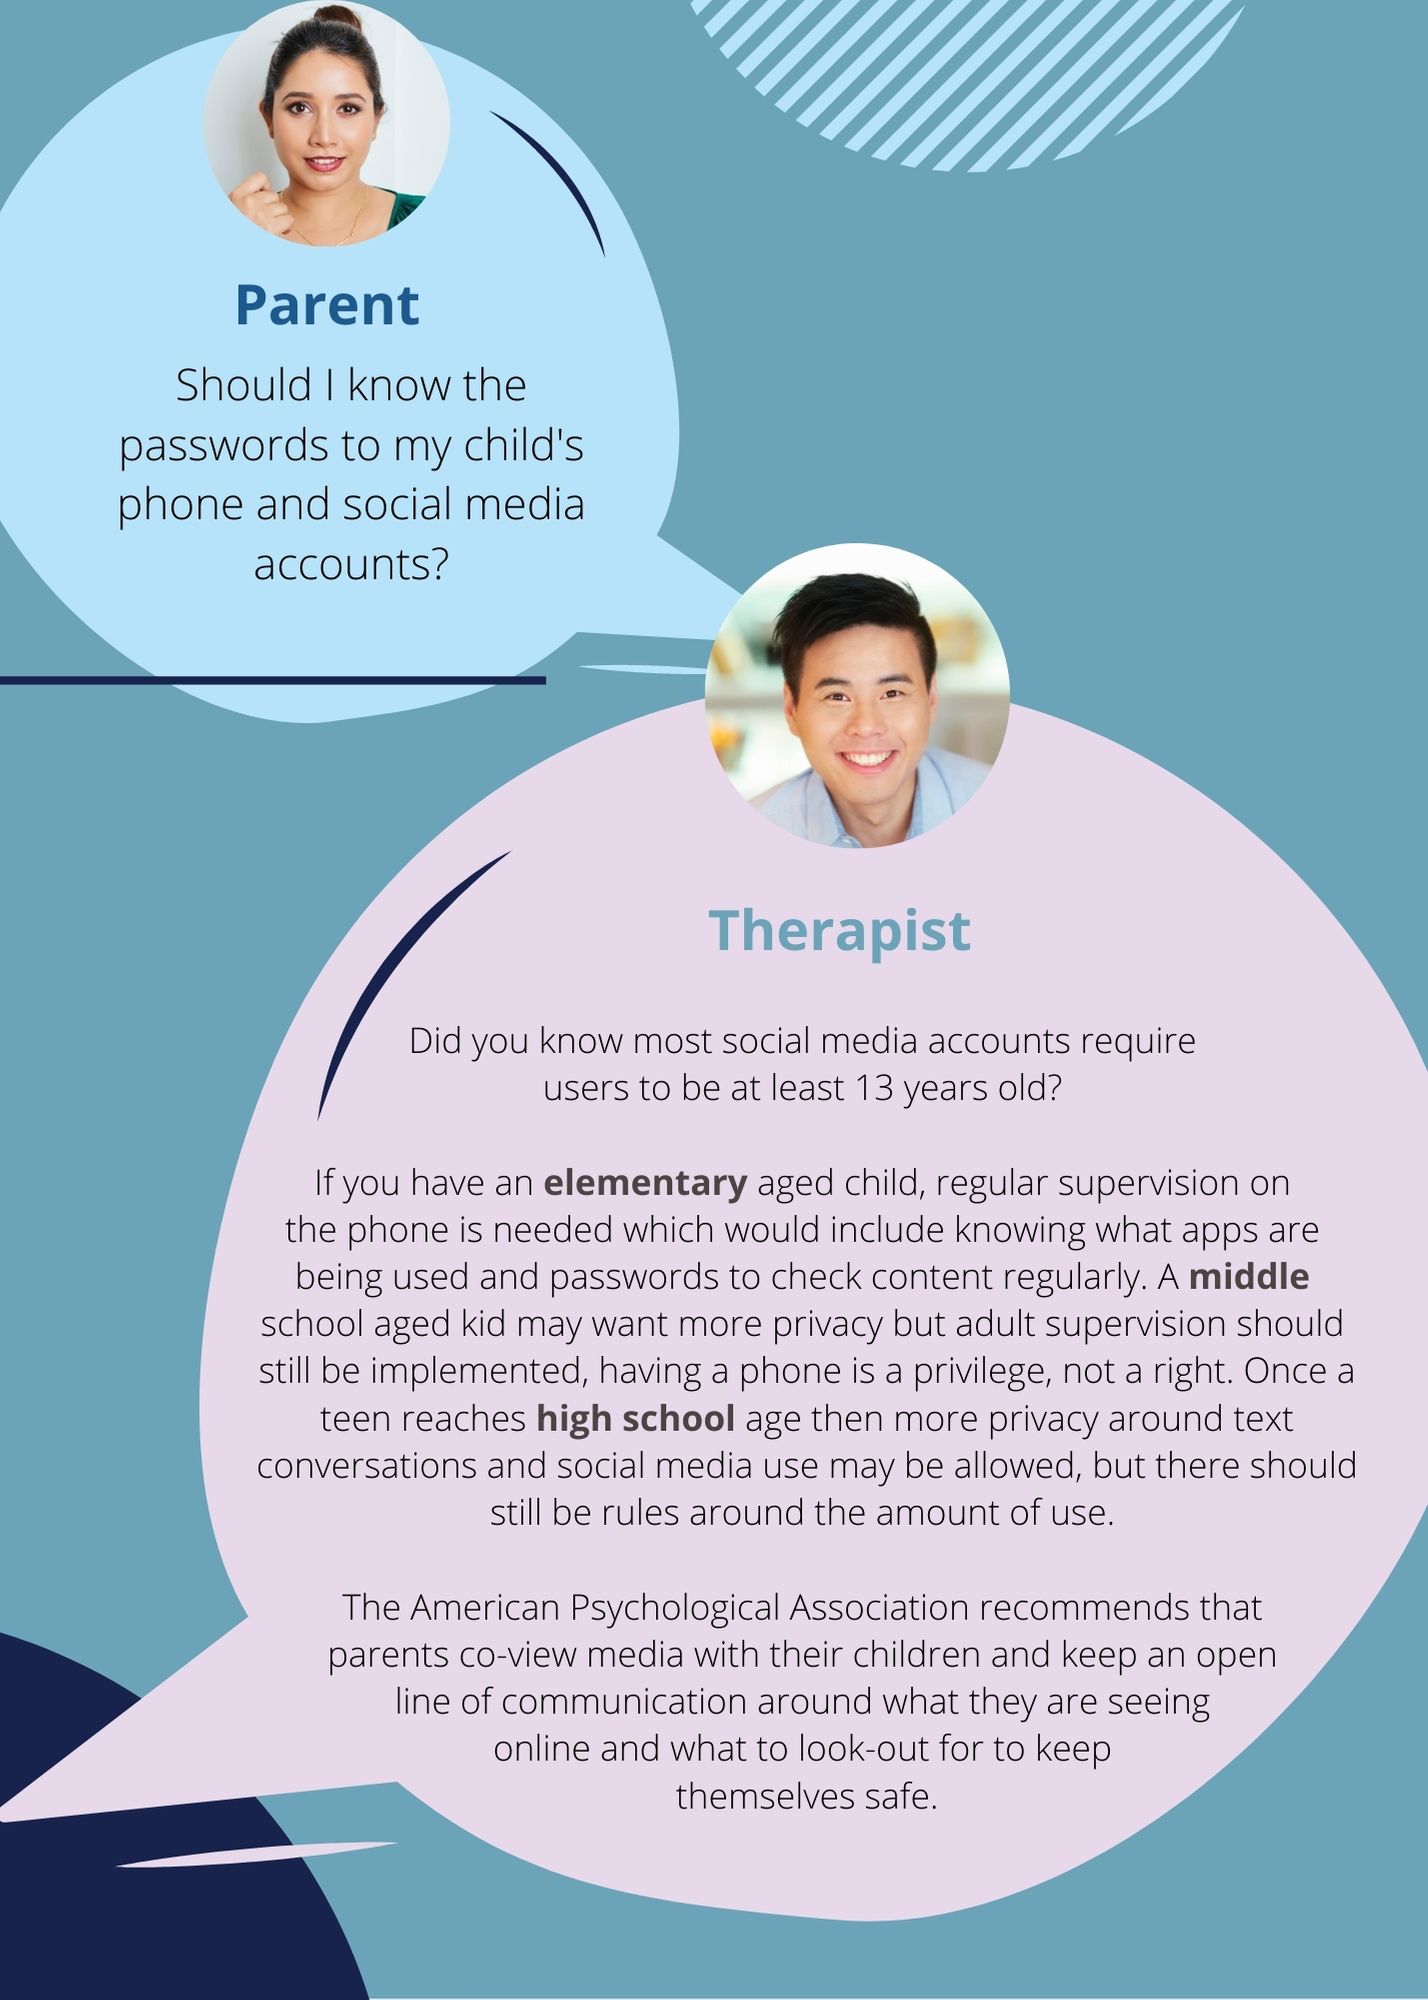 A parent asks, "Should I know the passwords to my child's phone and social media accounts?" A therapist answers that parents of elementary children should check content regularly. More privacy may be granted in middle and high school, but having a phone is a privilege not a right, and there should be rules around use.